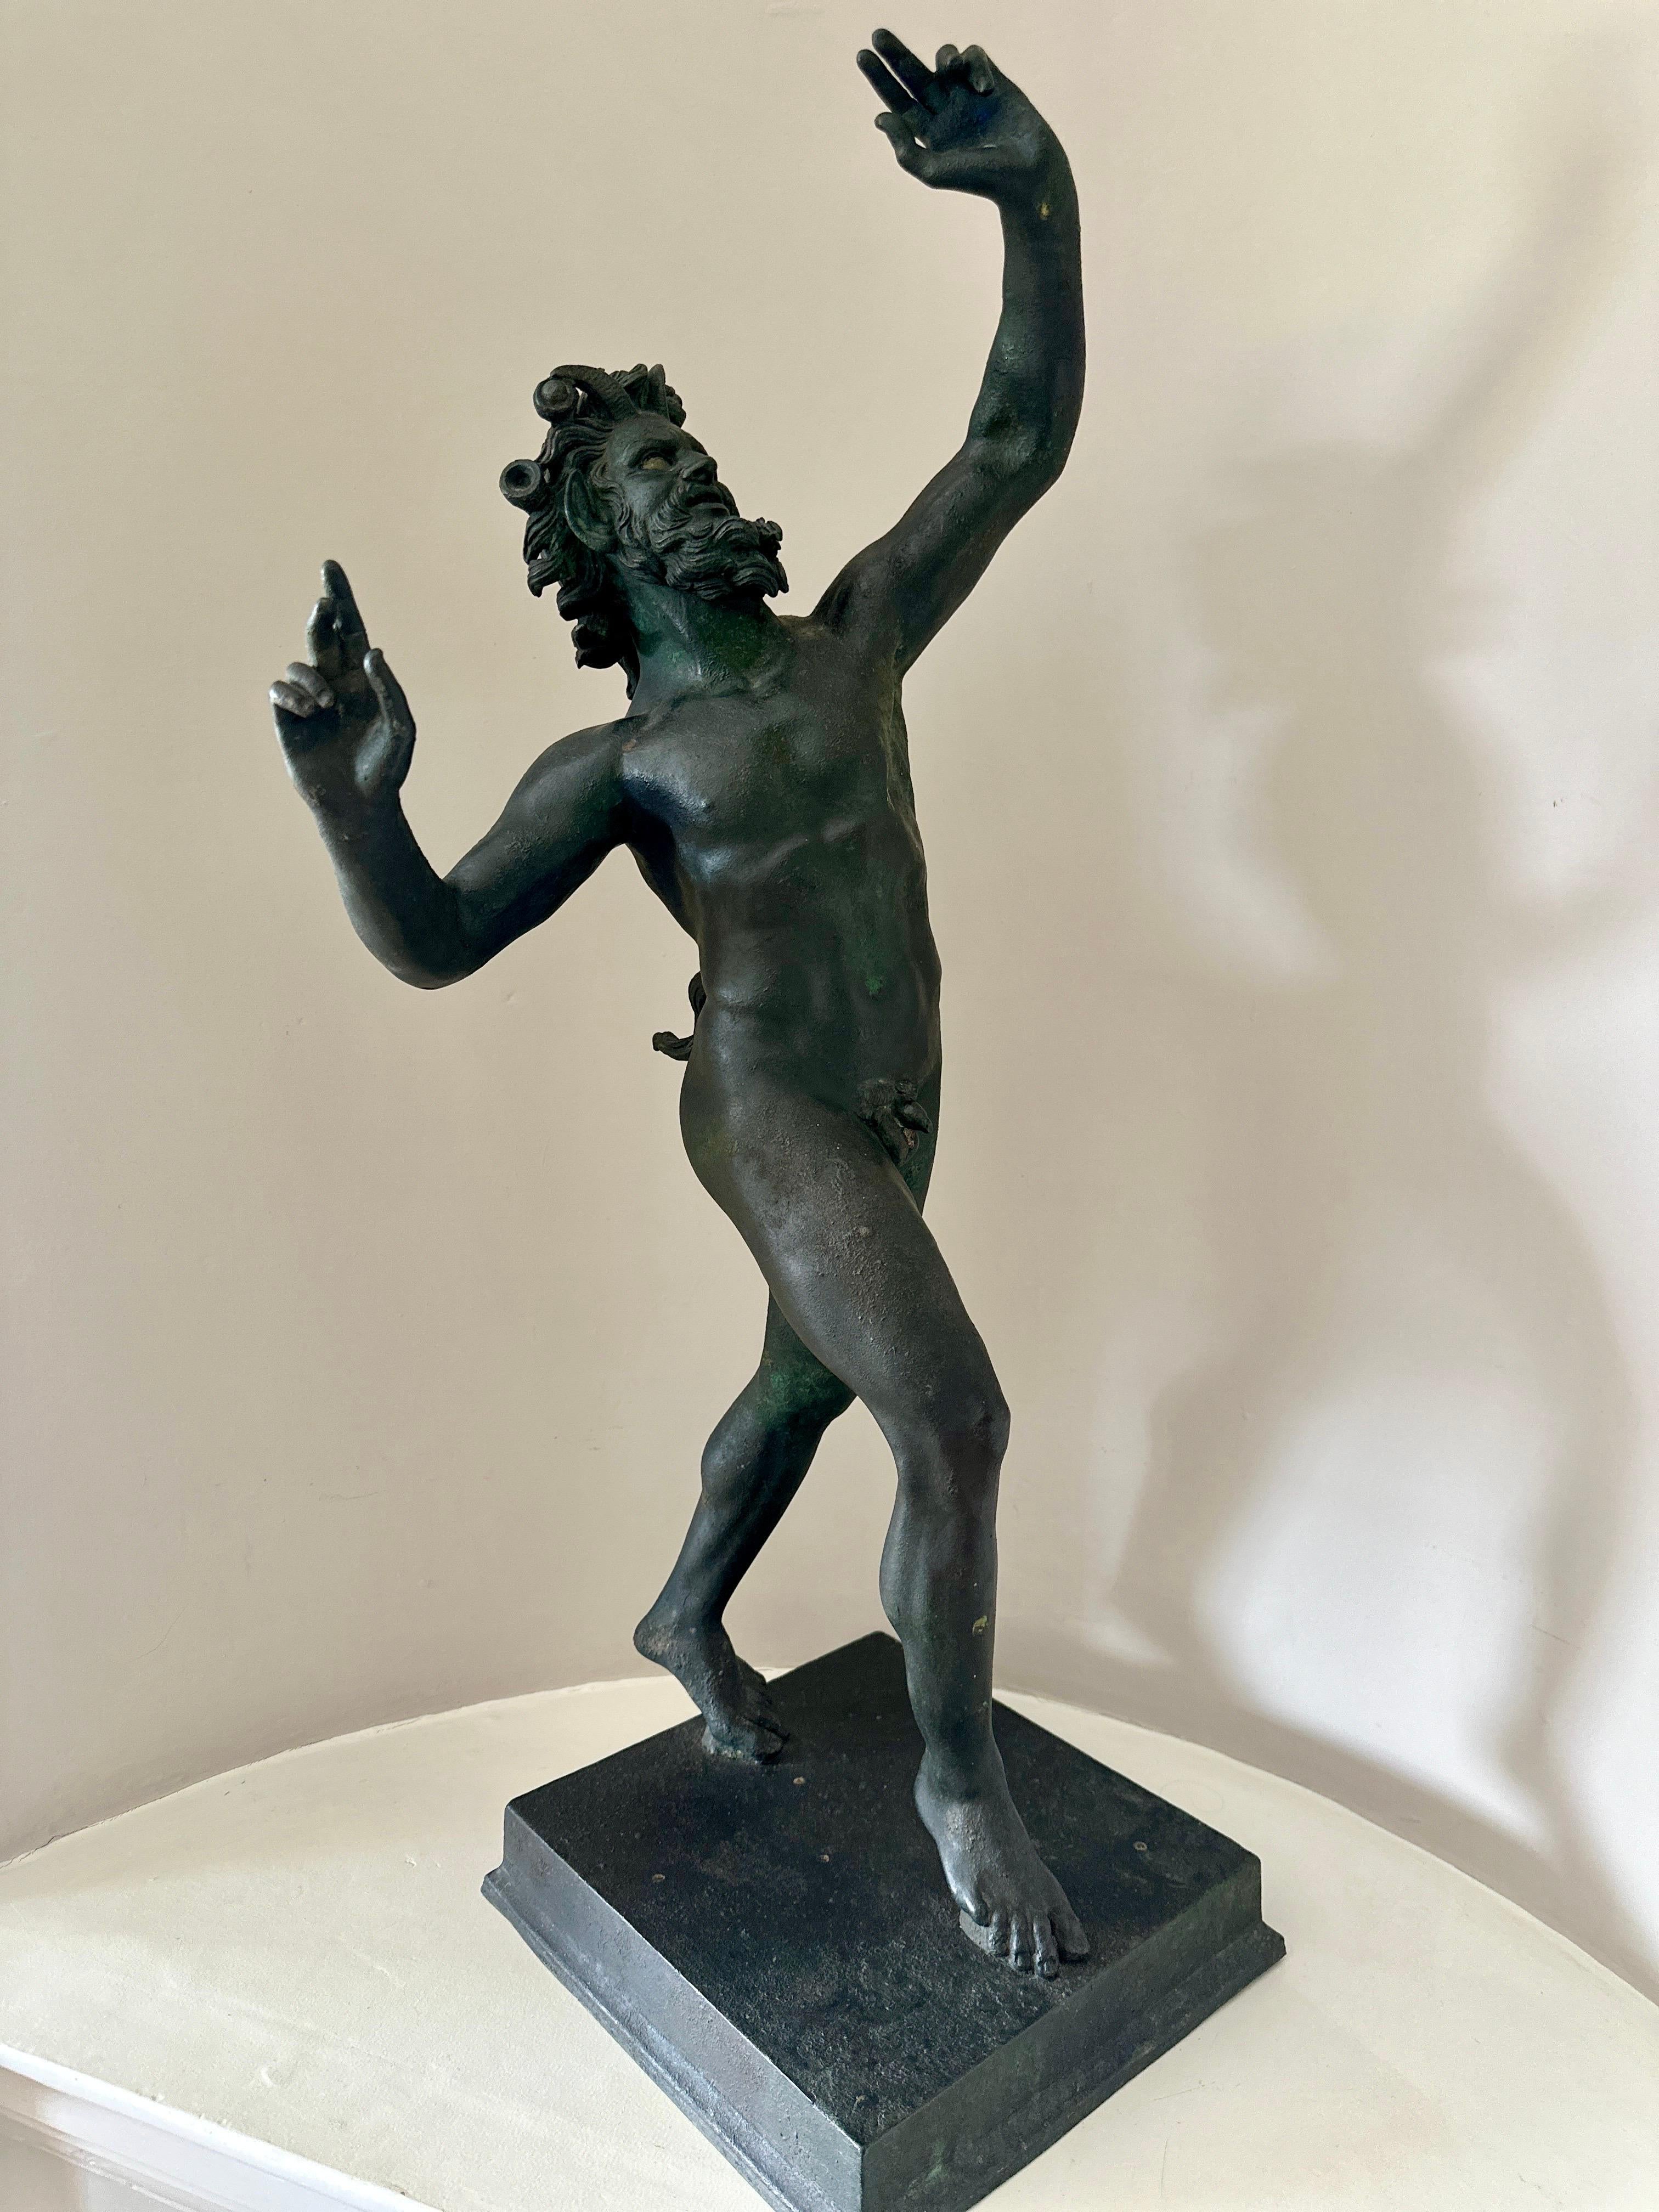 A 19th century 'Grand Tour'  bronze figure of the Dancing Faun, standing on a bronze square plinth. The faun balances on his toes and pivots, his horned head raised, his hair wreathed with acorns. He is smiling lasciviously, flipping his tail, and